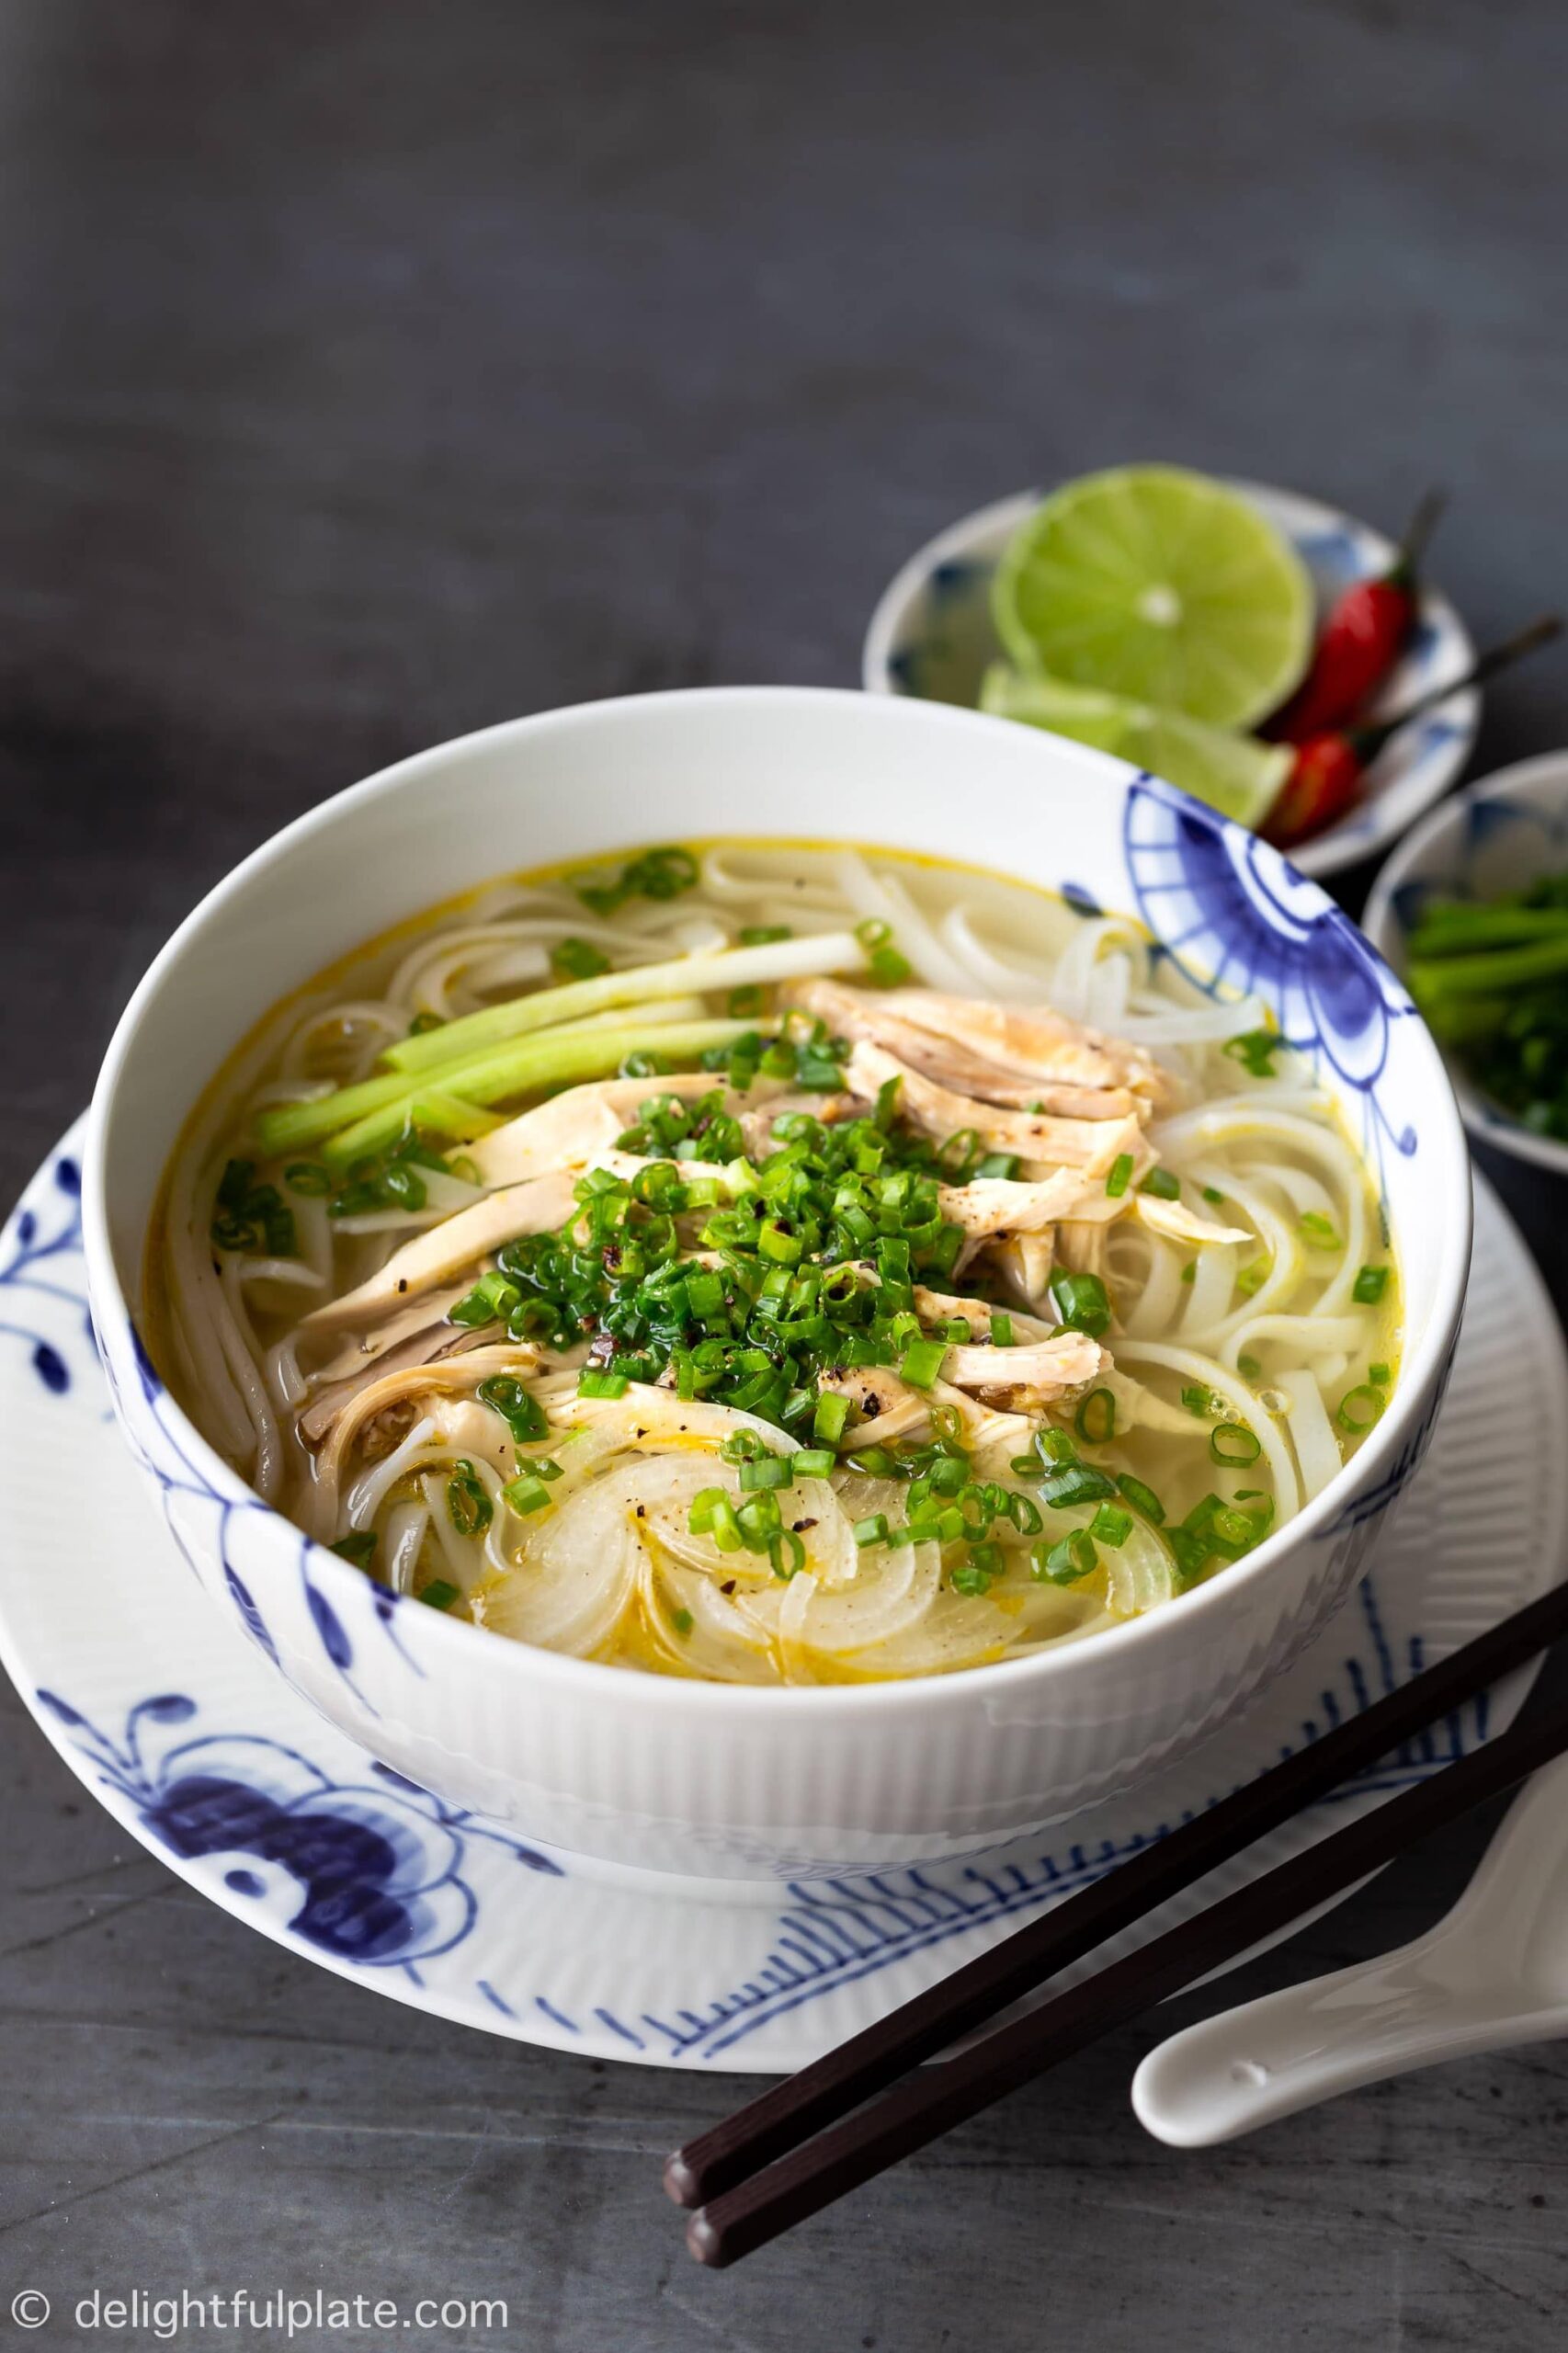  Perfectly cooked chicken adds a boost of protein to this soup.